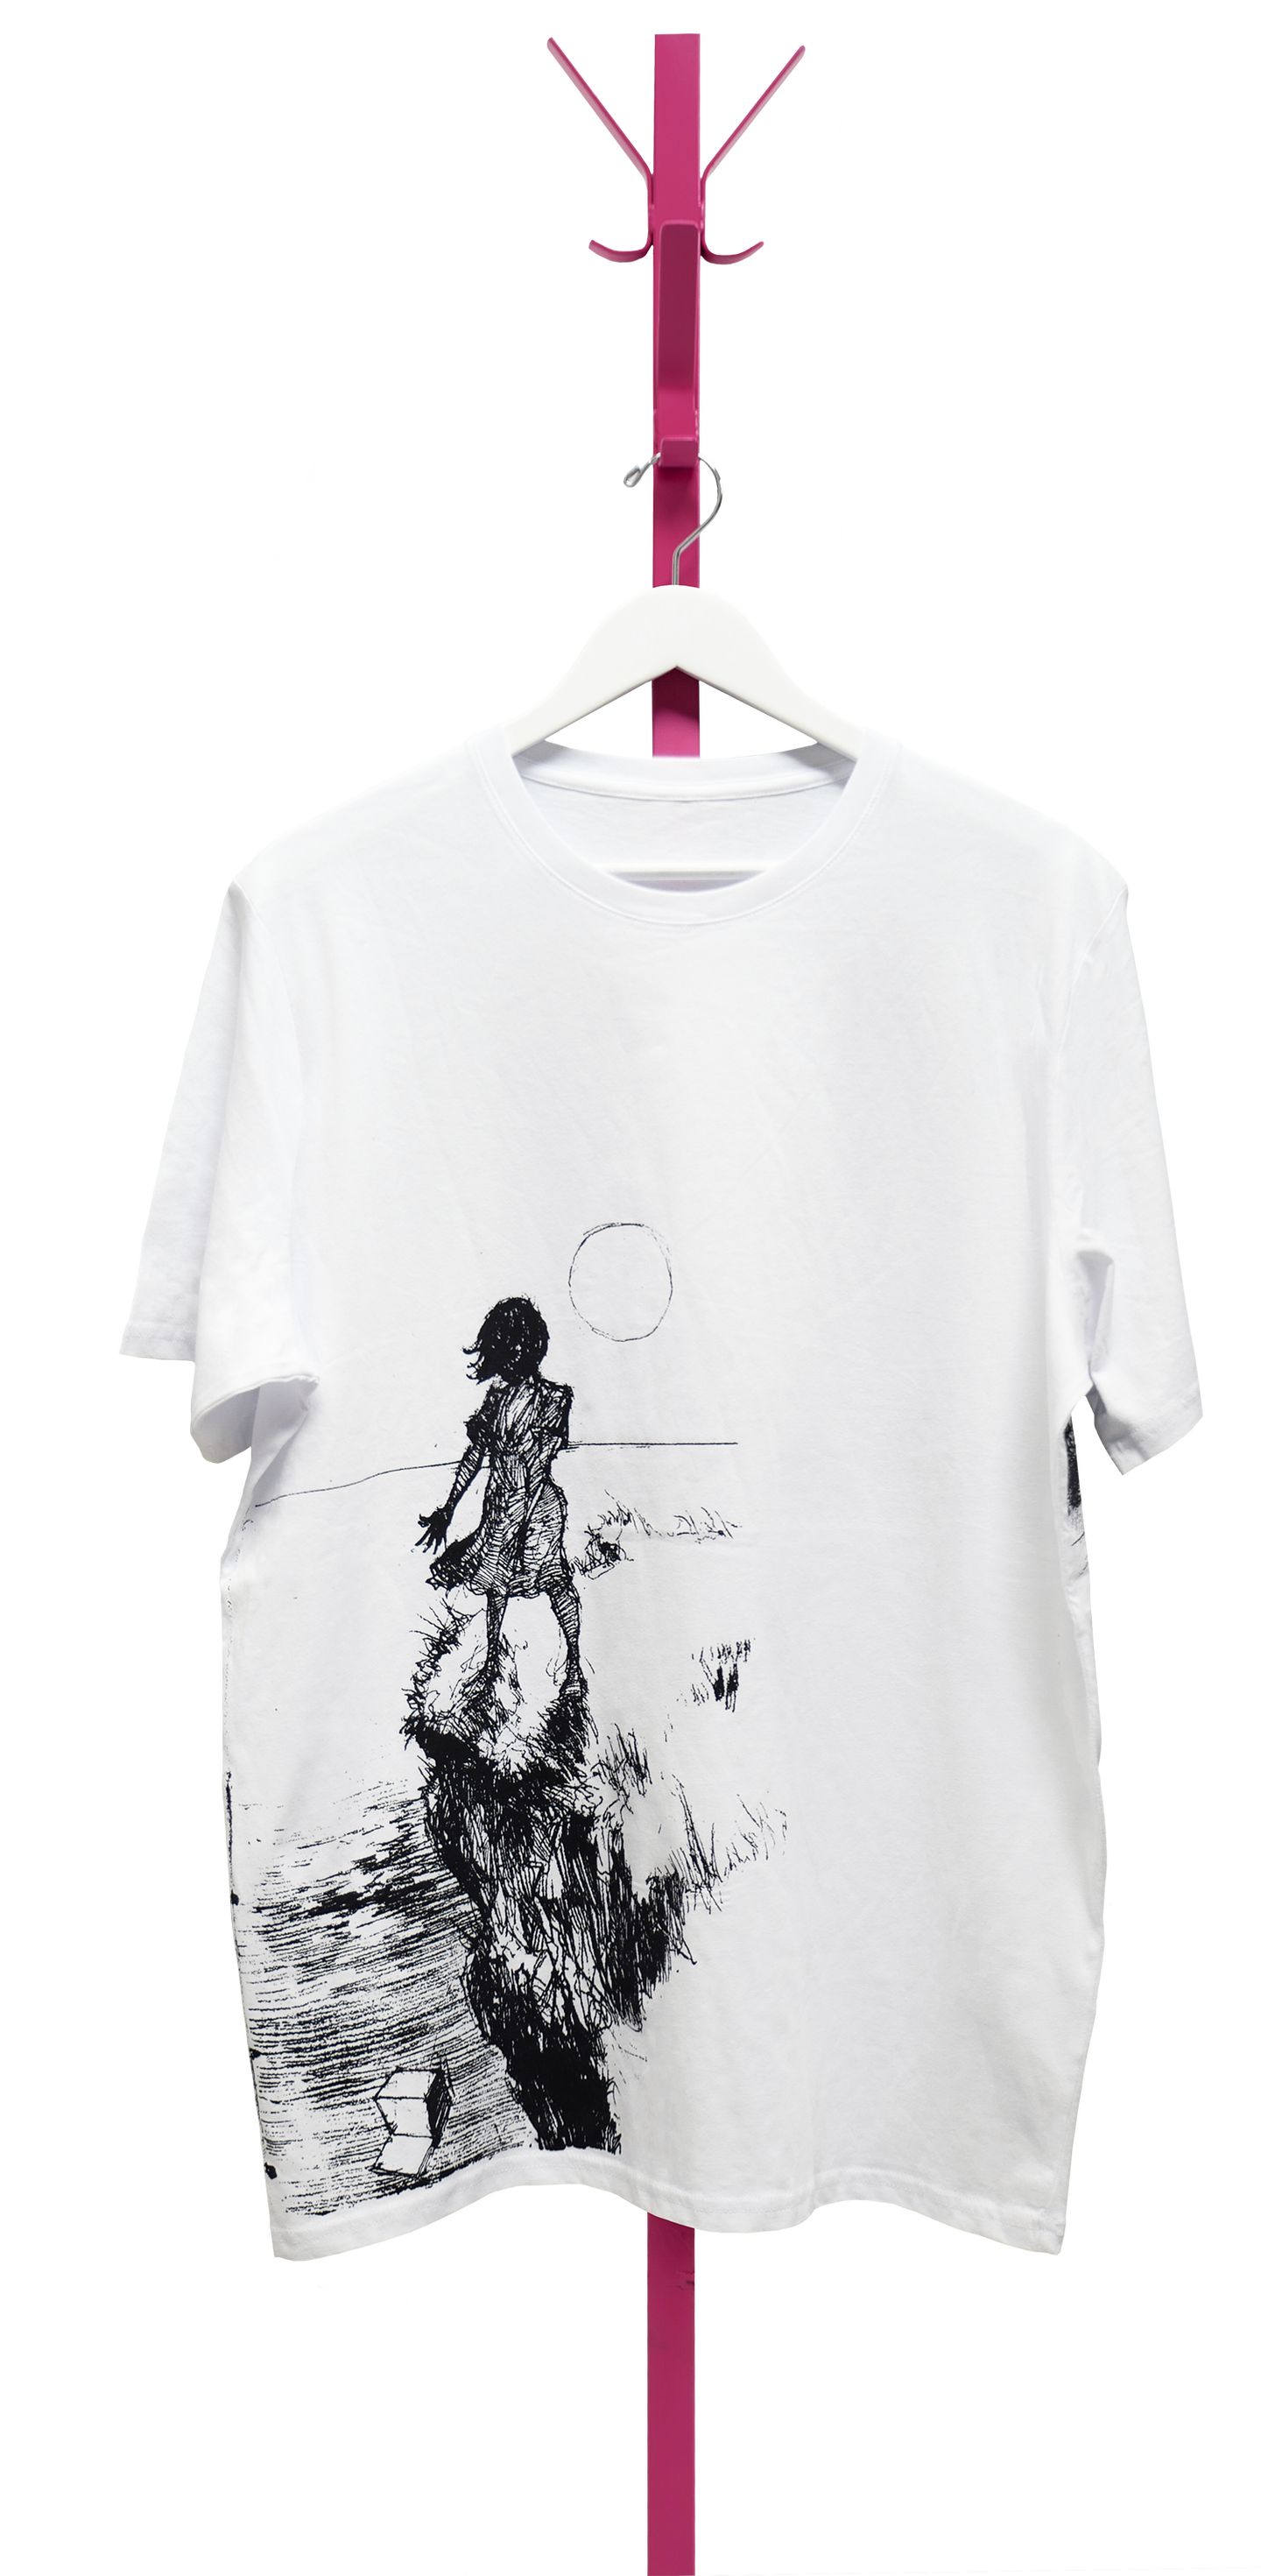 Mode 2 Girl on the Edge T-Shirt Edition